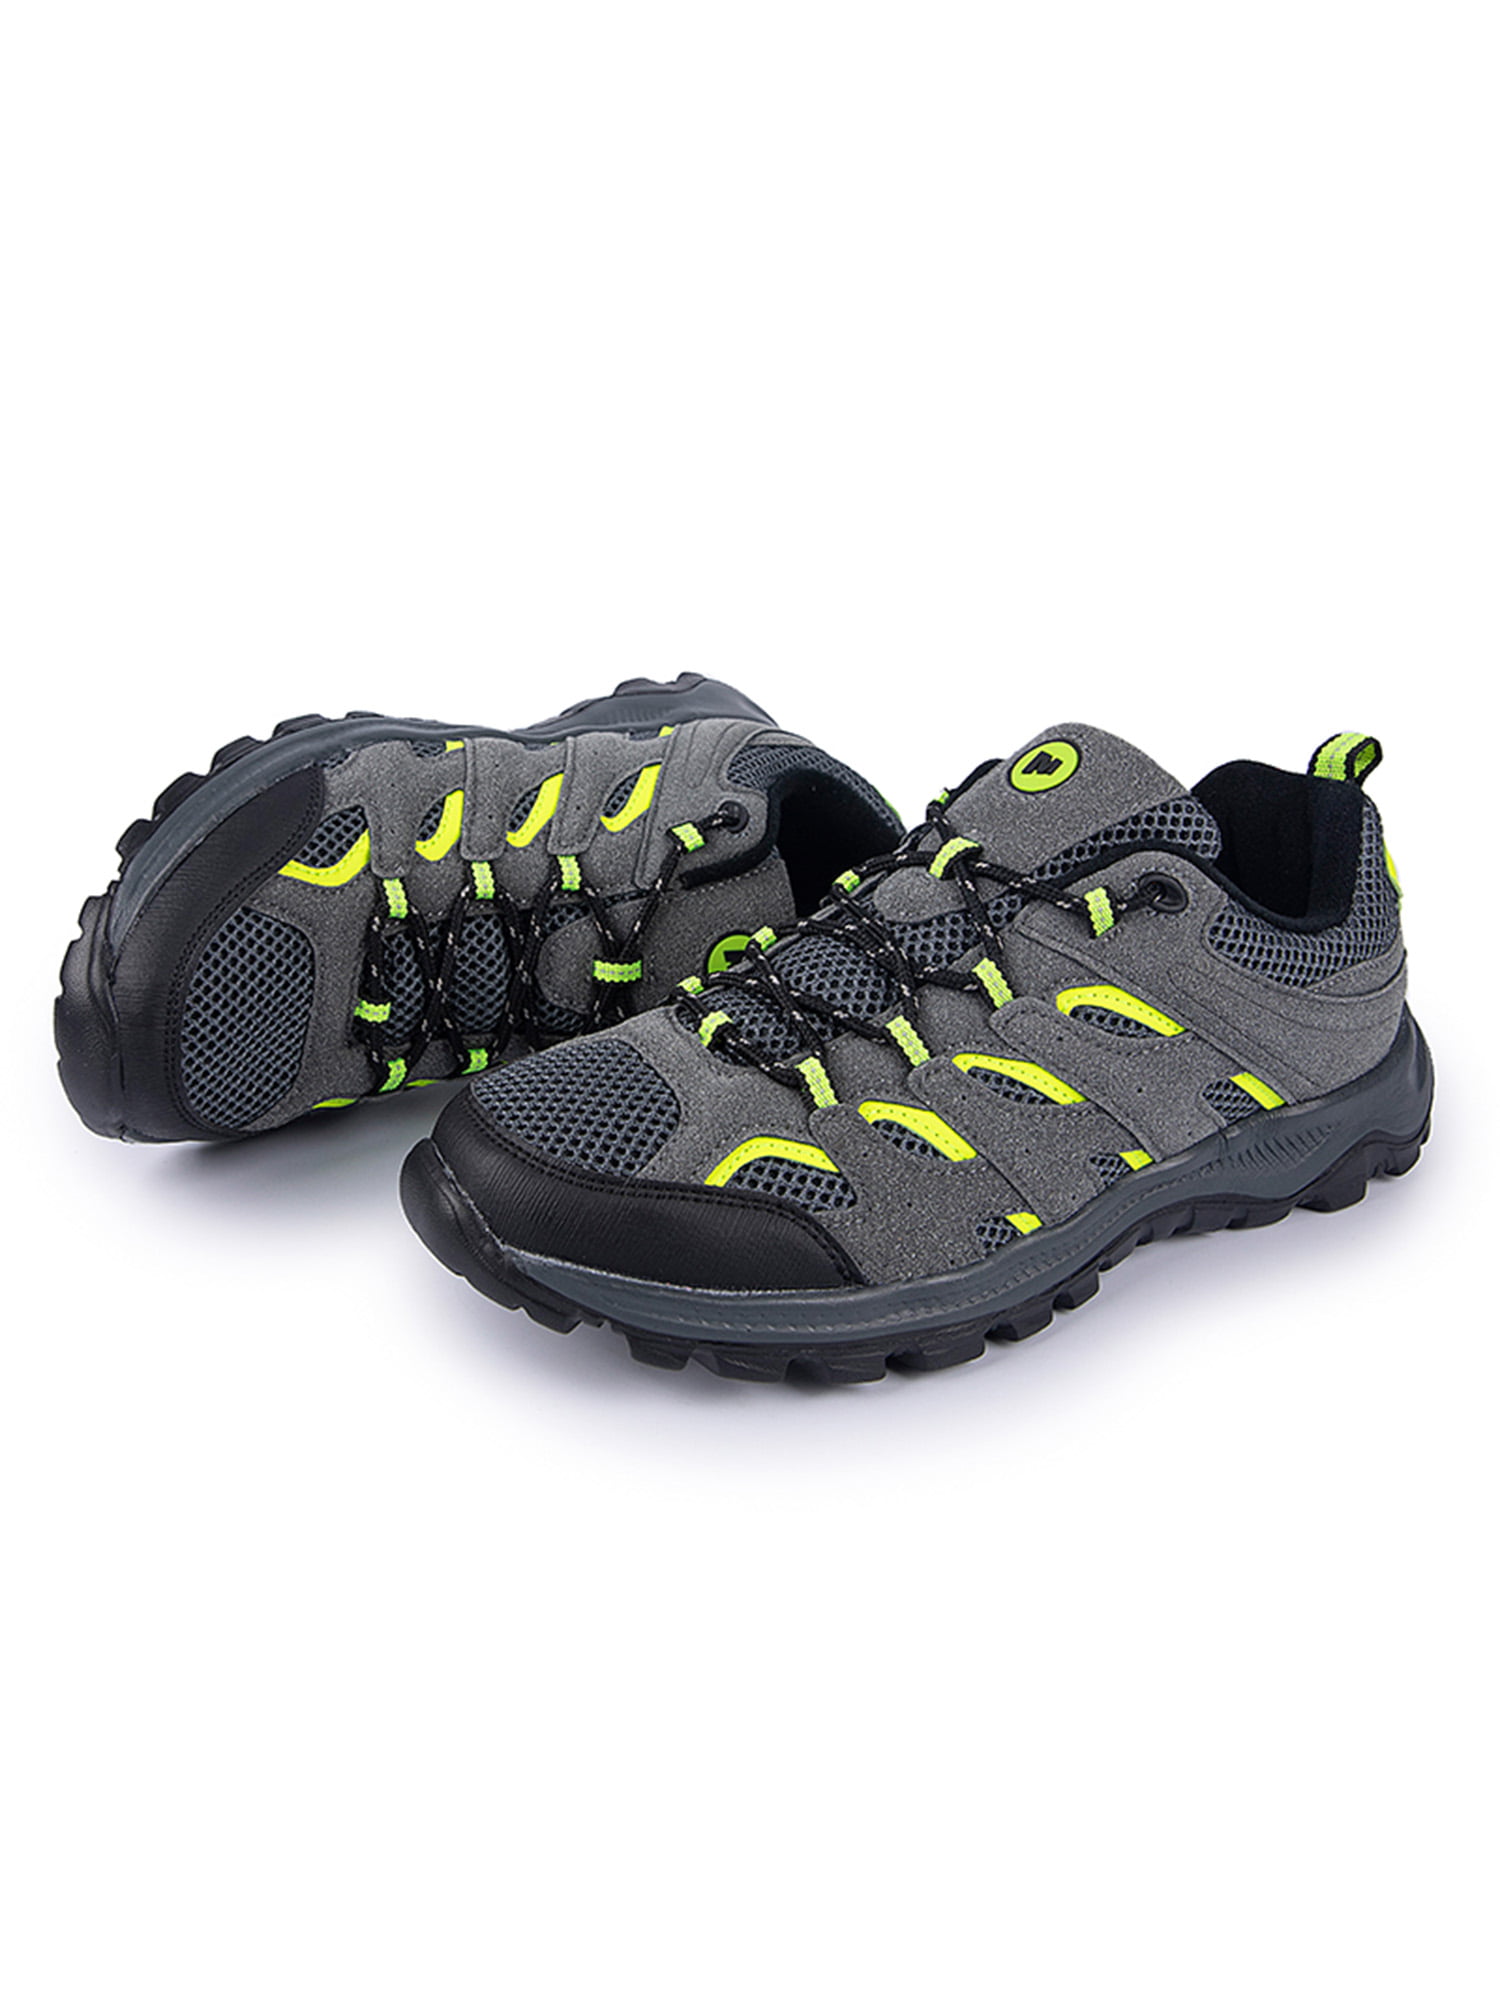 Details about   Men's Size Sneaker Steel Toe Cap Sports Safety Shoes Work Boots Running Hiking 